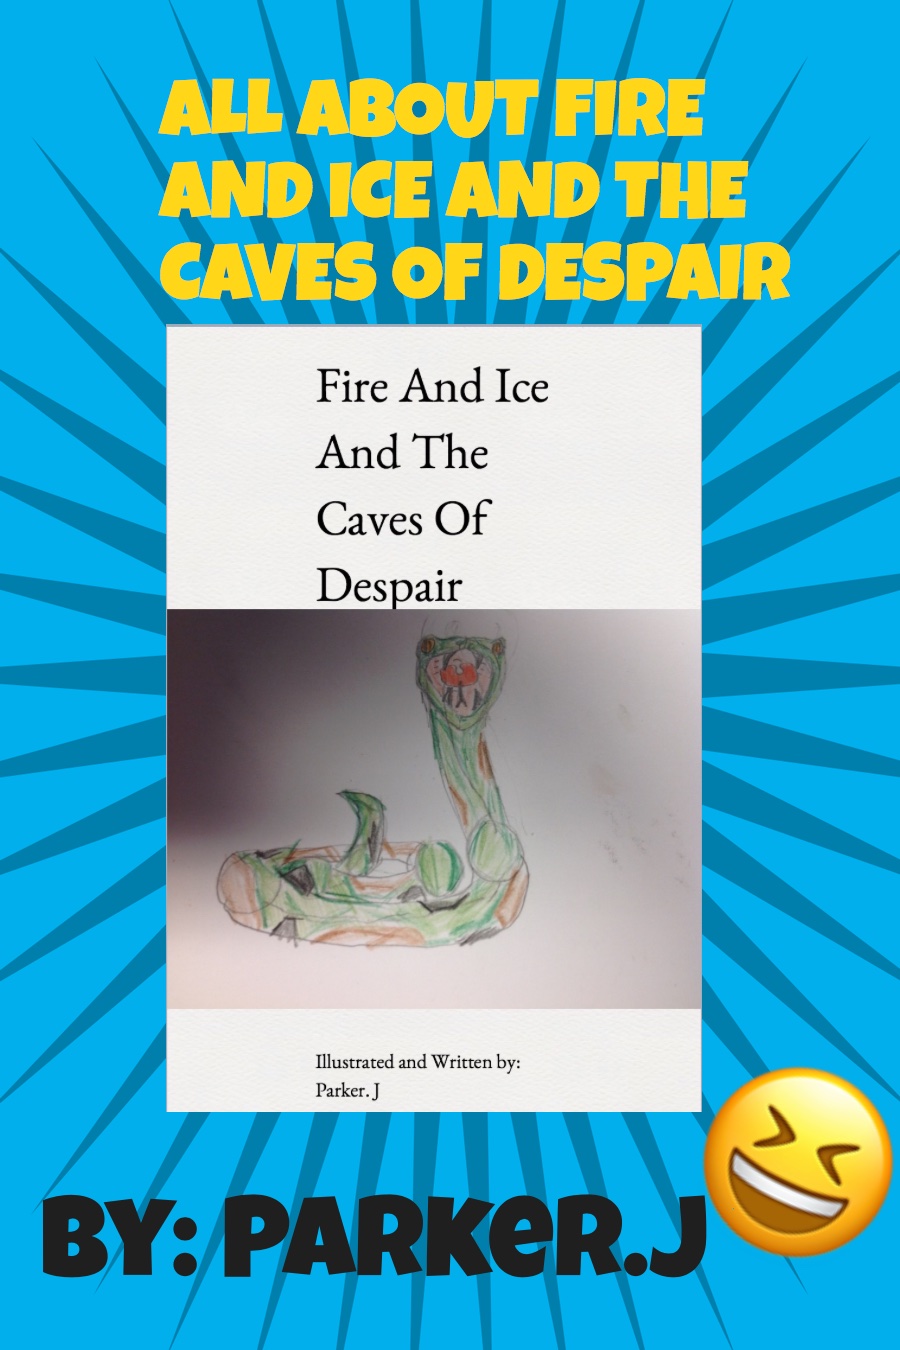 All About Fire and Ice and The Caves of Despair by Parker J